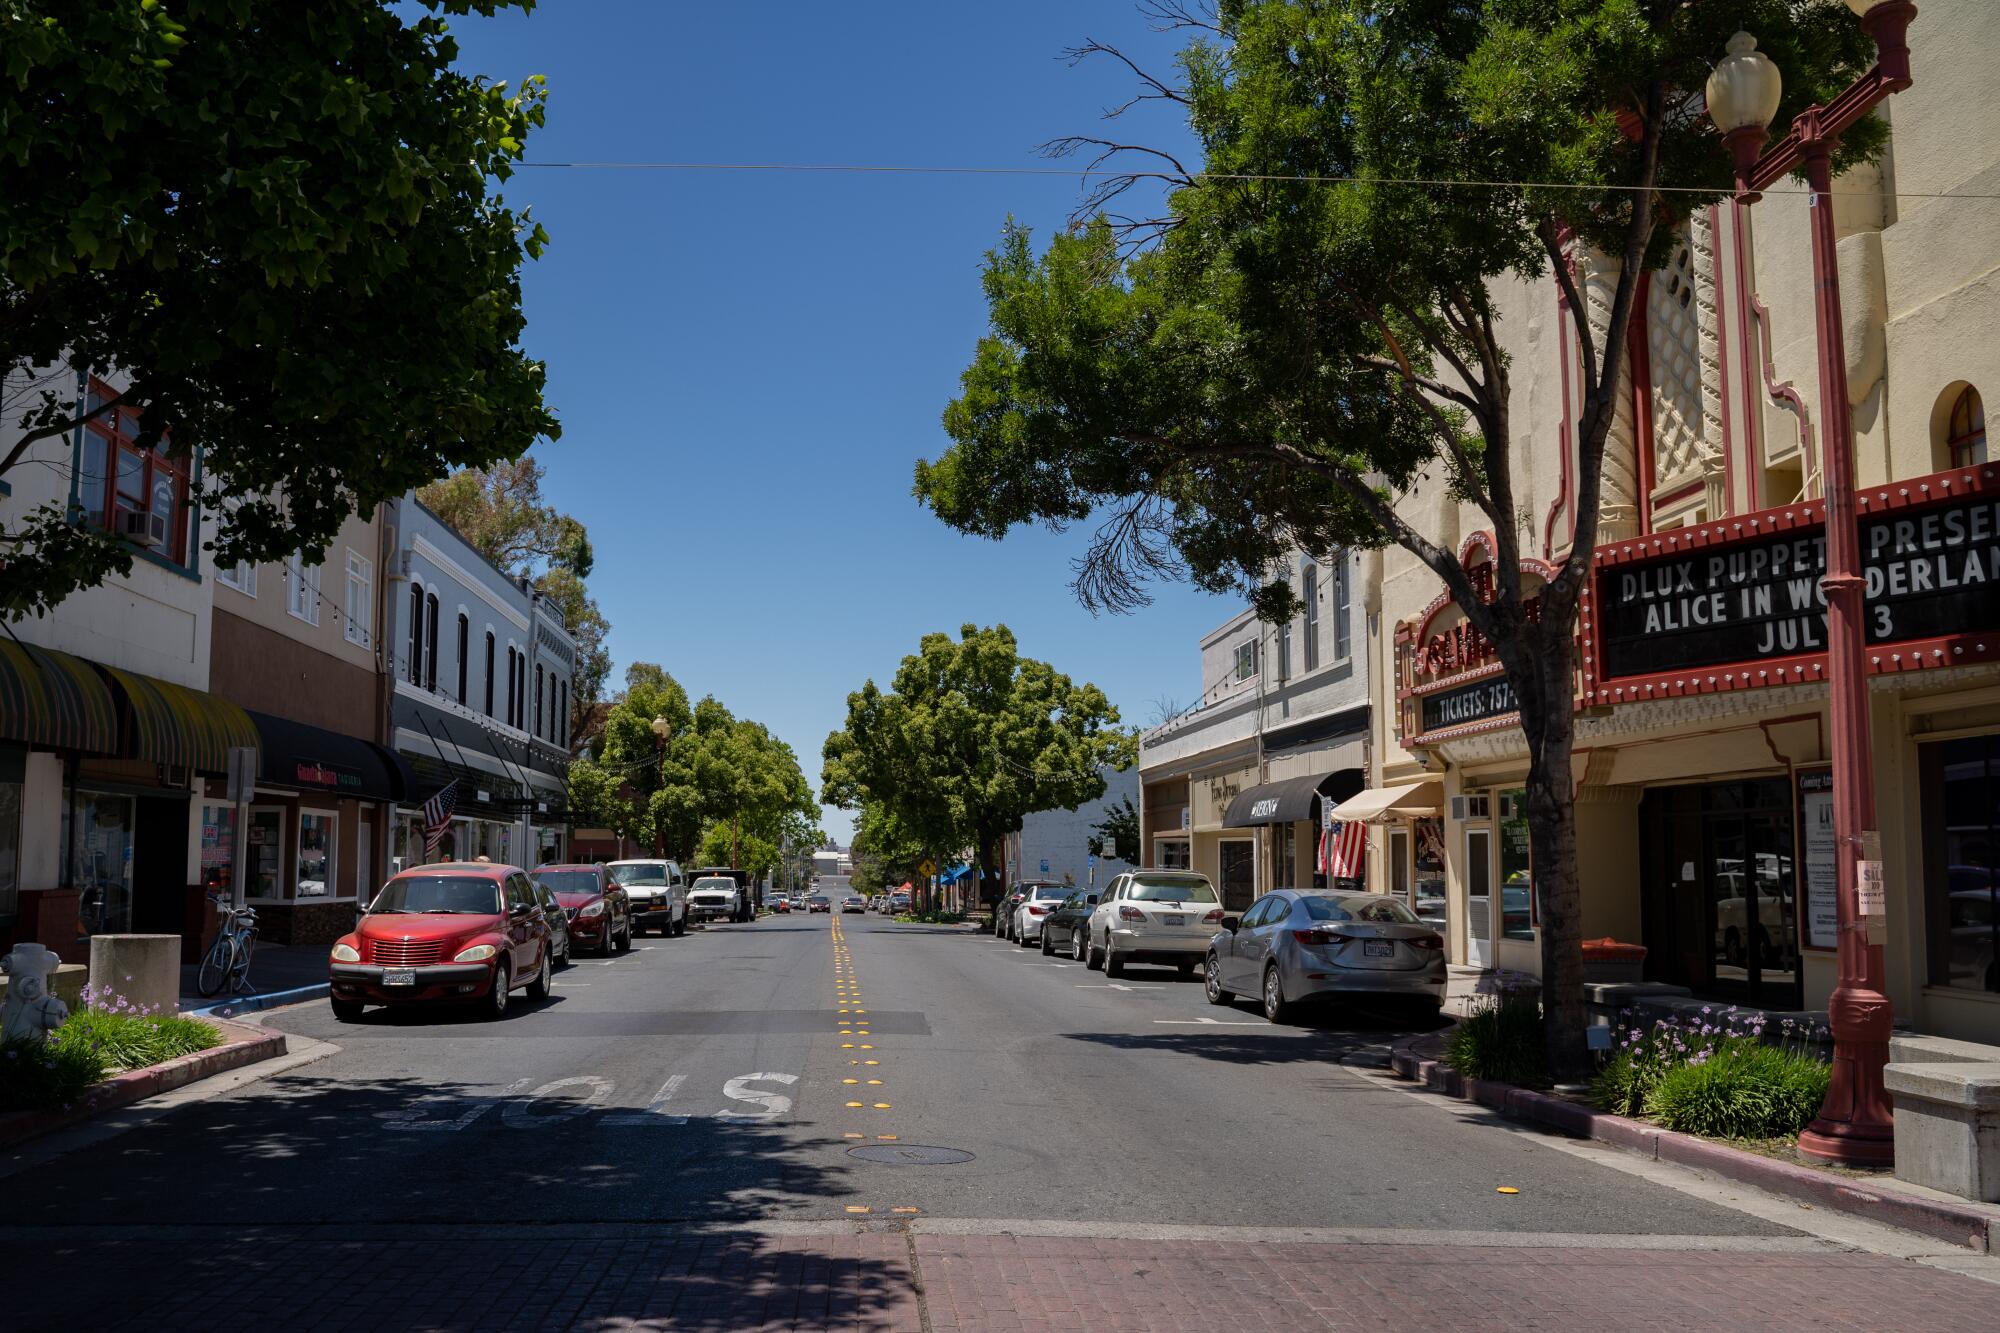 Second Street, where the former Chinatown once existed in Antioch, Calif.